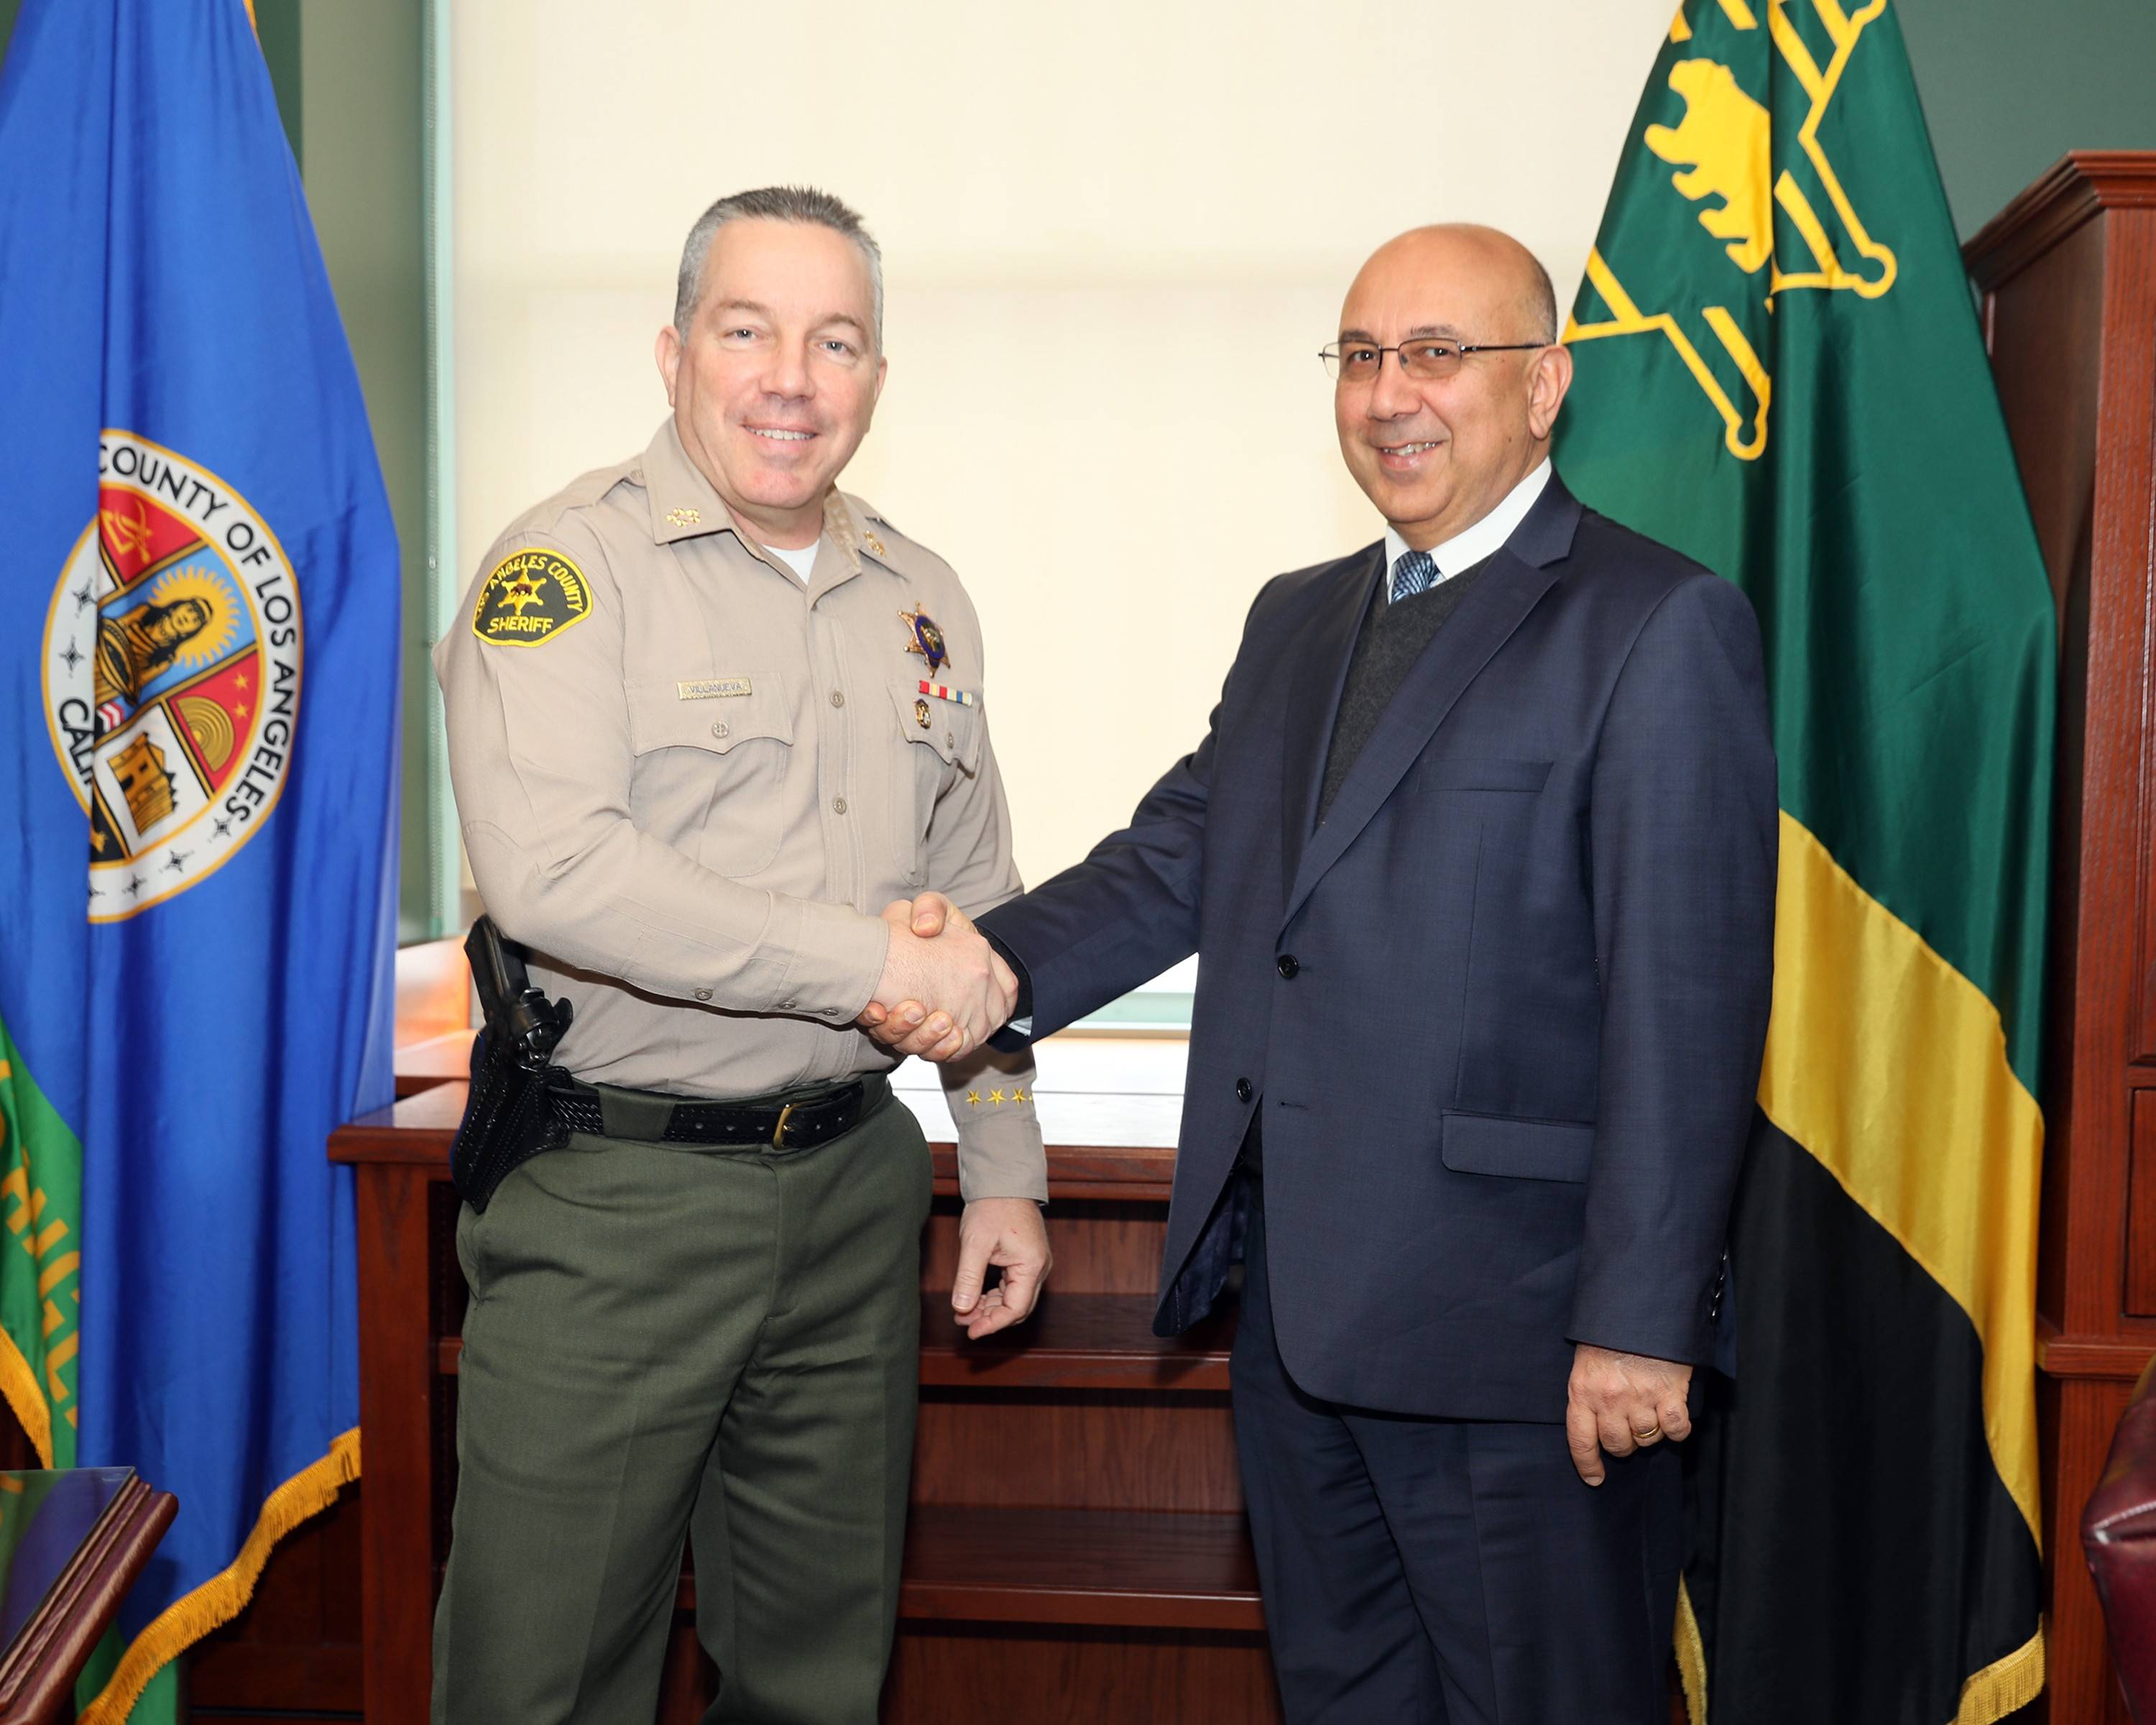 Meeting of Consul General Baibourtian with Los Angeles County Sheriff